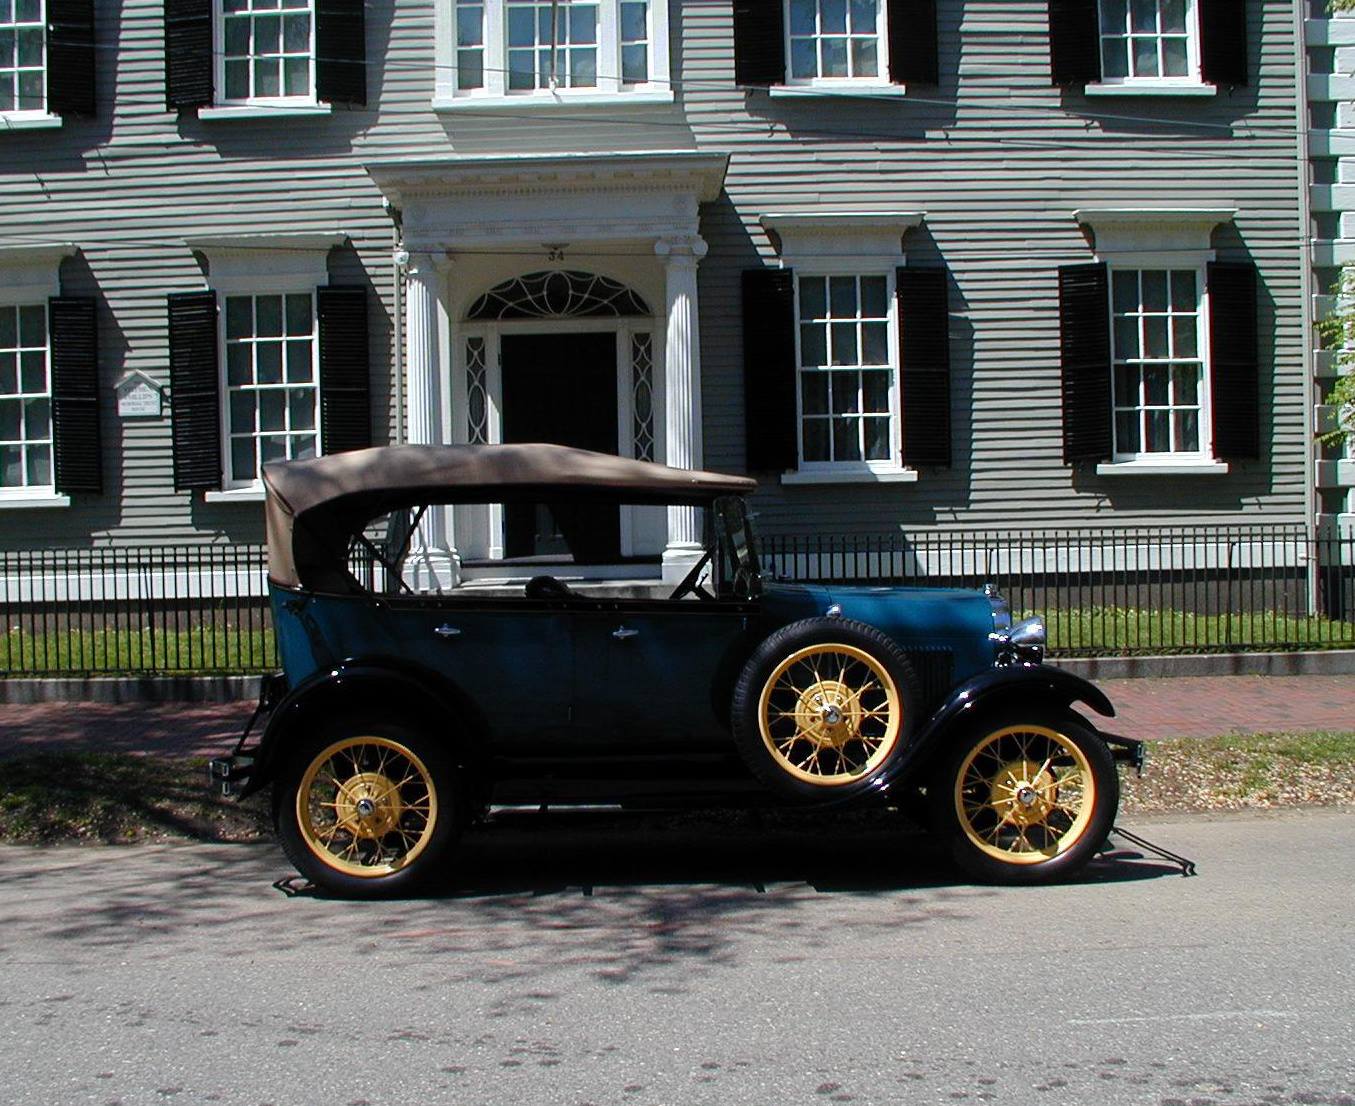 an old car parked in front of a large house.